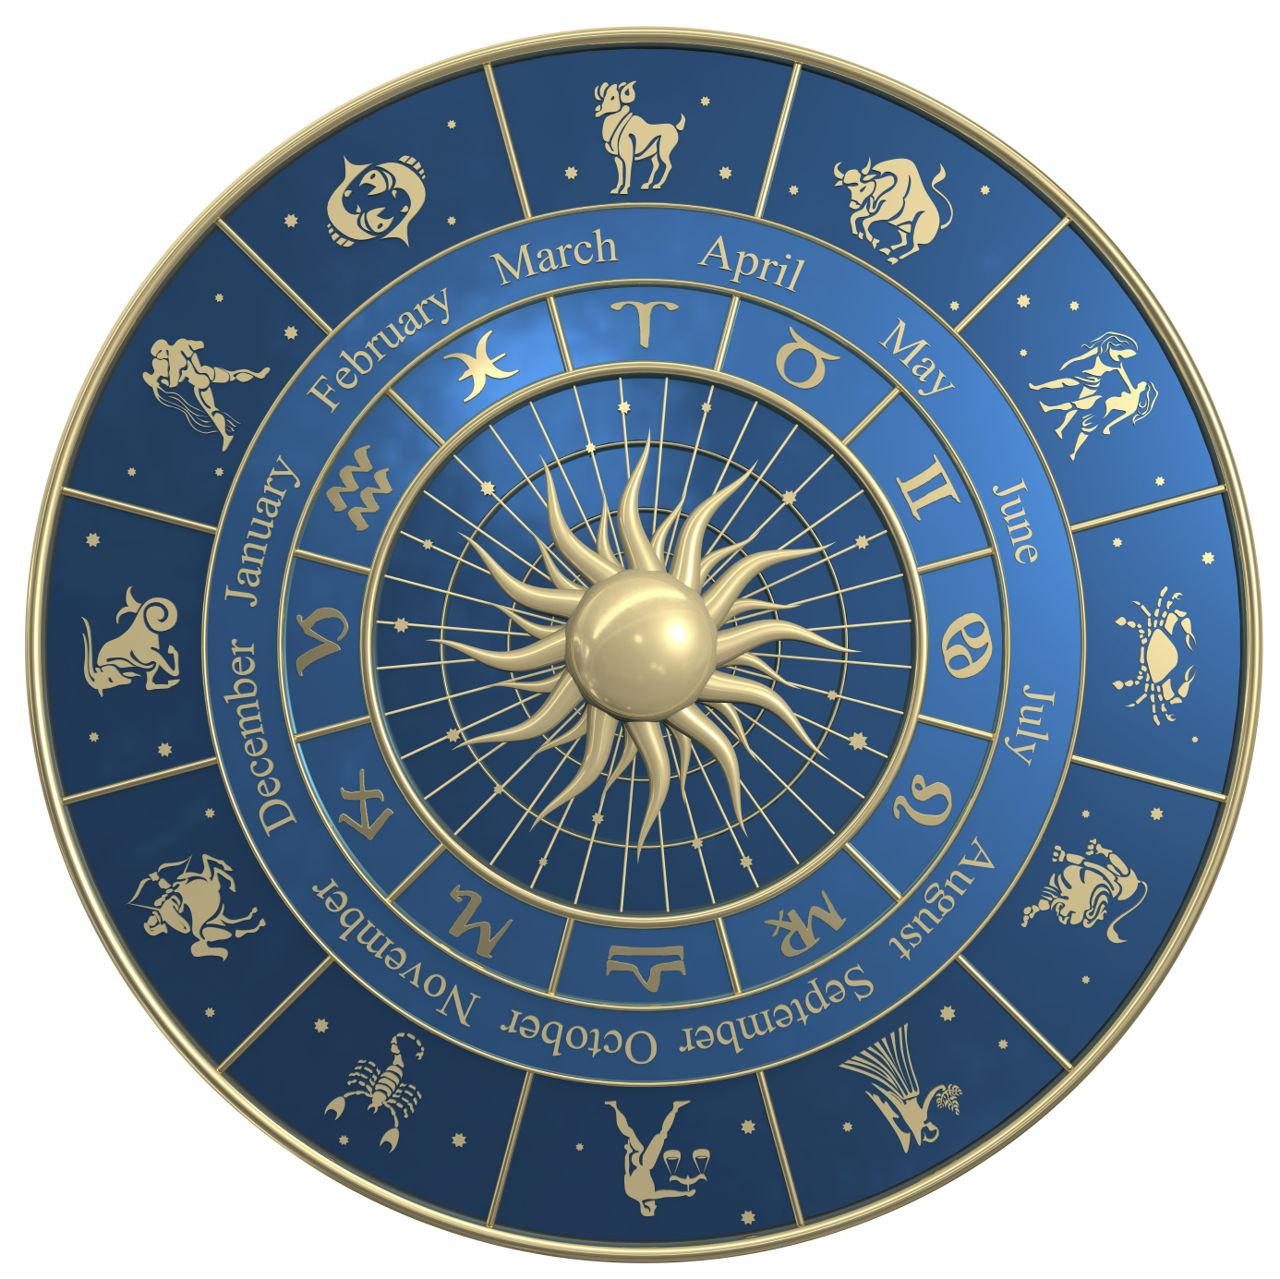 which sign is the moon in astrology